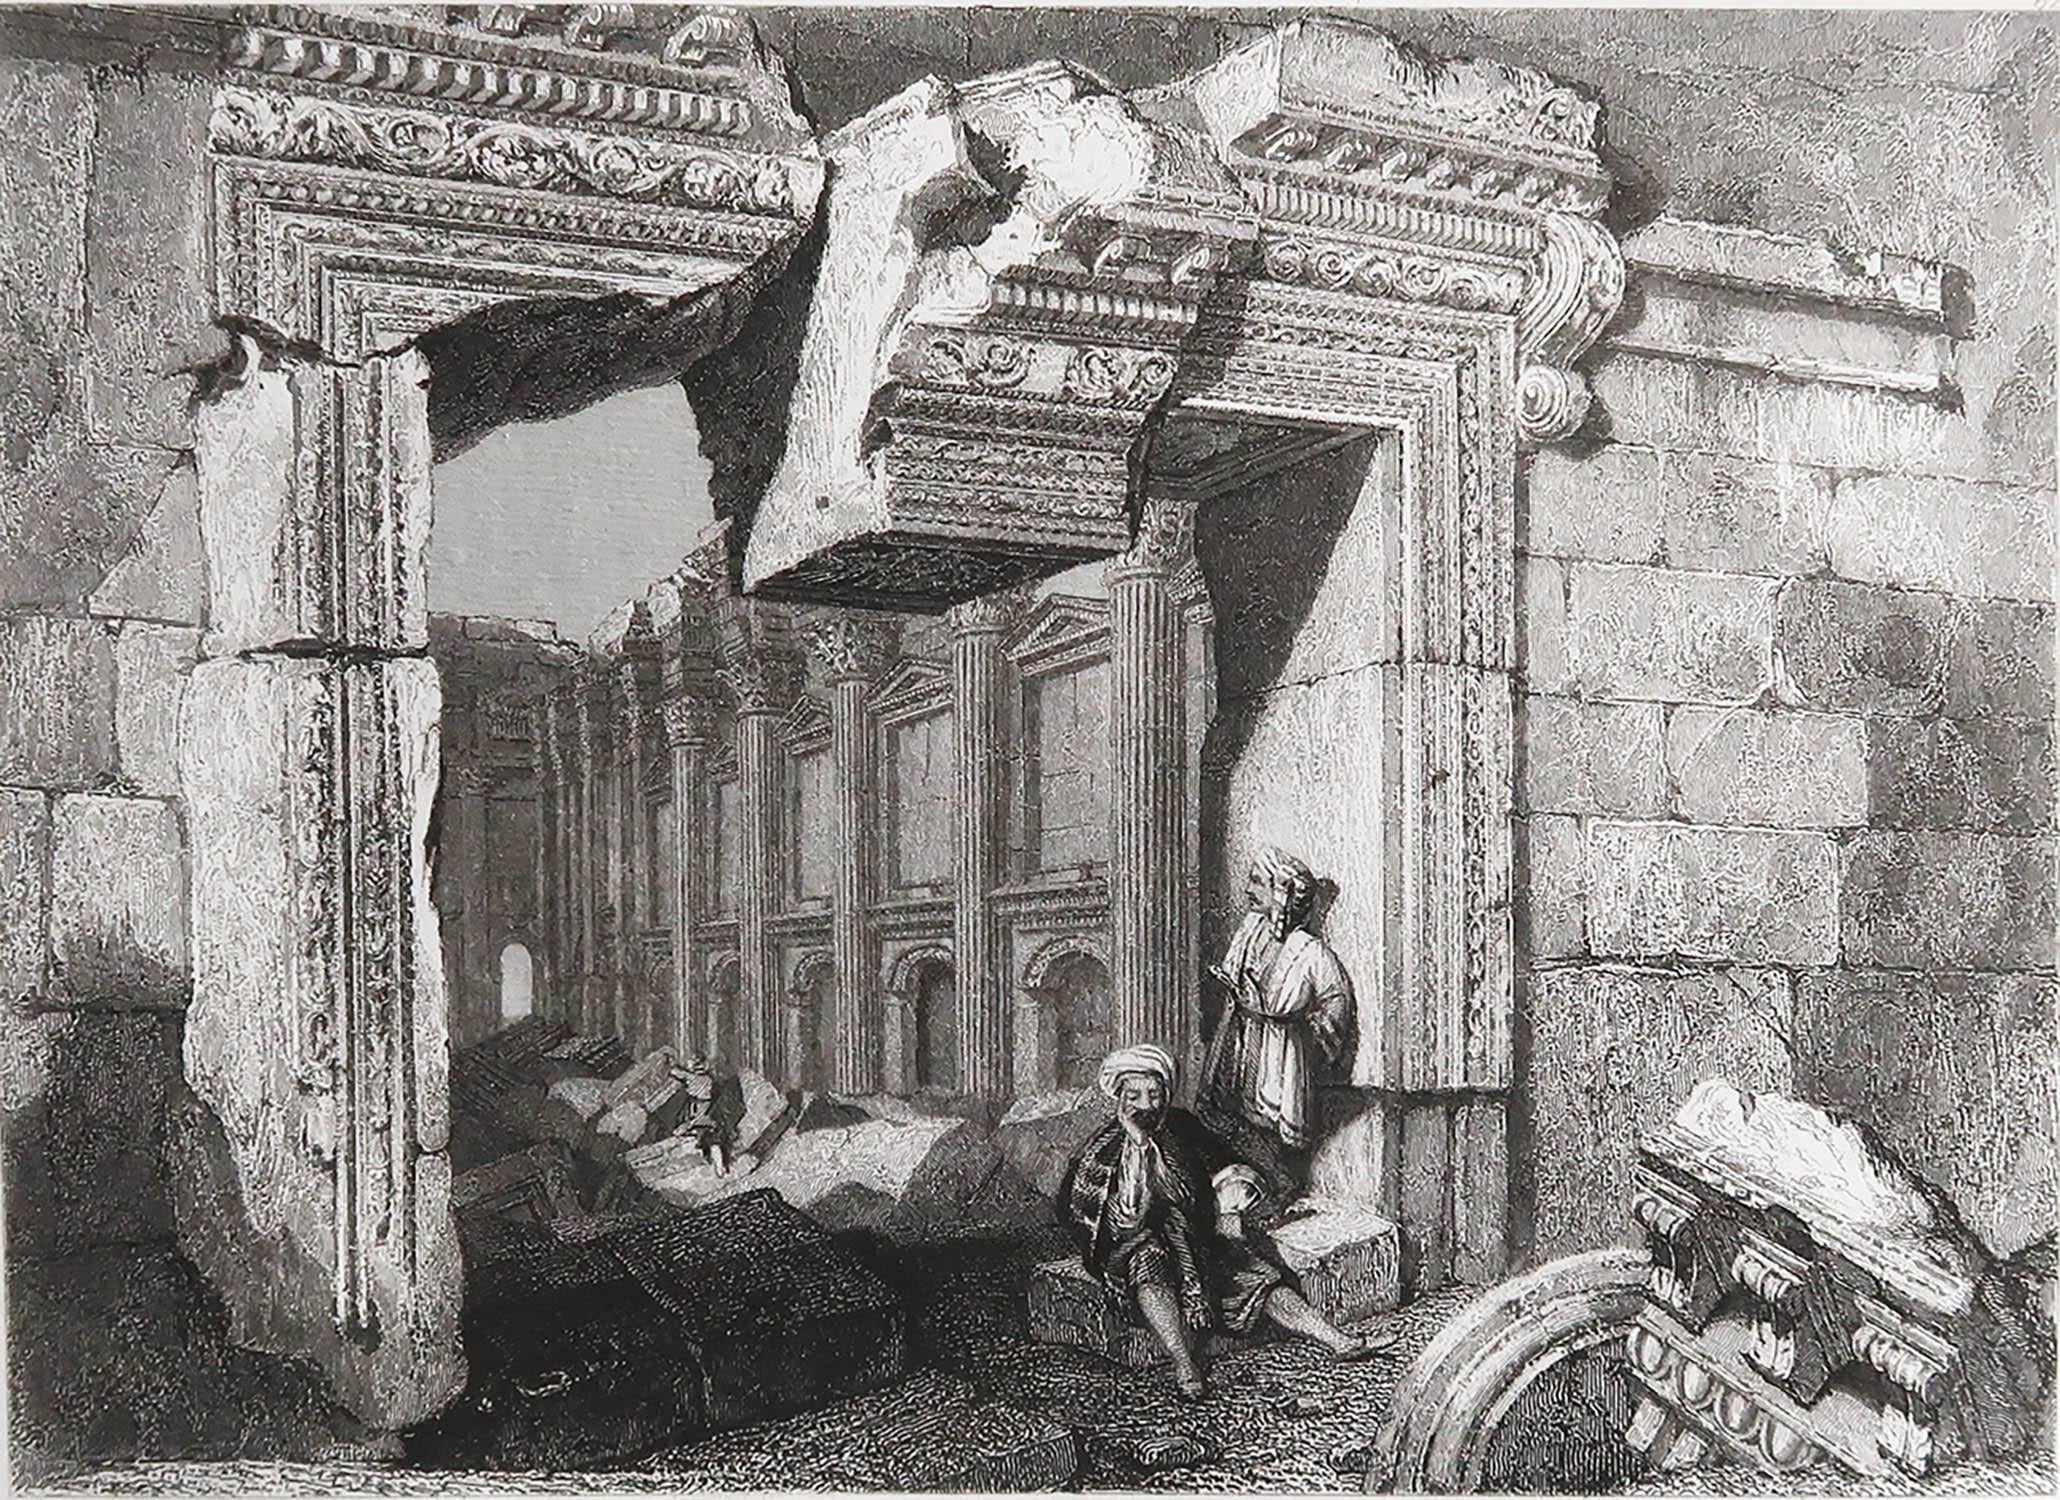 Wonderful image of The Temple of Baalbek gate

Fine steel engraving by Finden after C.Stanfield

Published by Murray. Dated 1835

Unframed.

